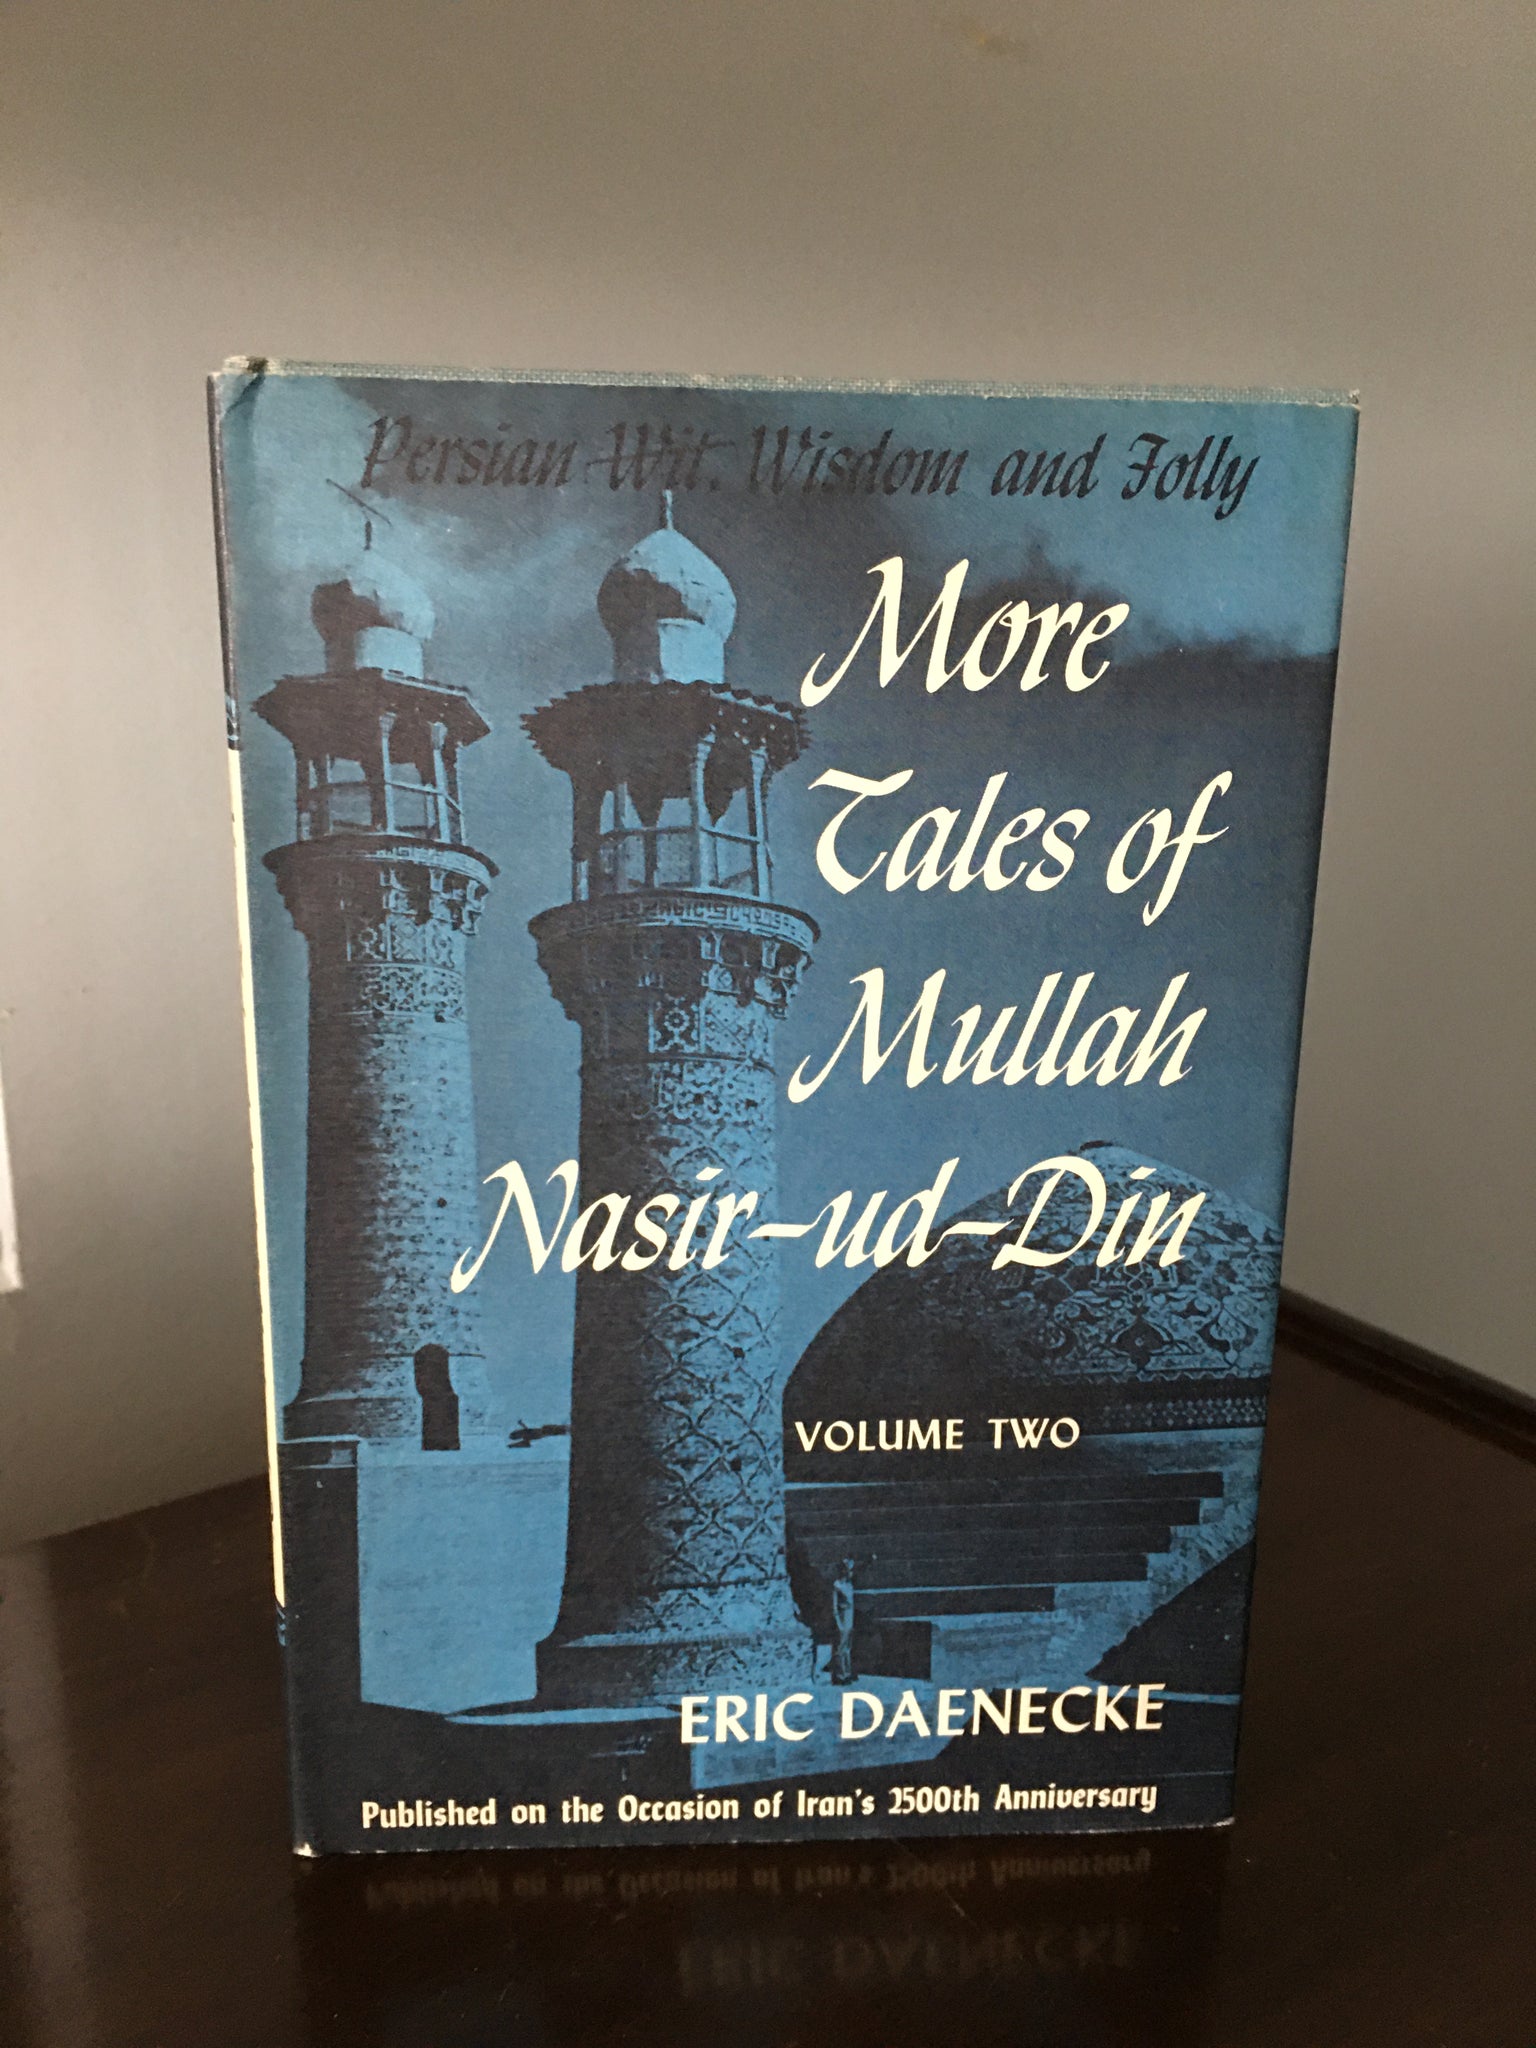 More Tales of Mullah Nasir-ud-Din, Volume Two, Persian Wit Wisdom and Folly